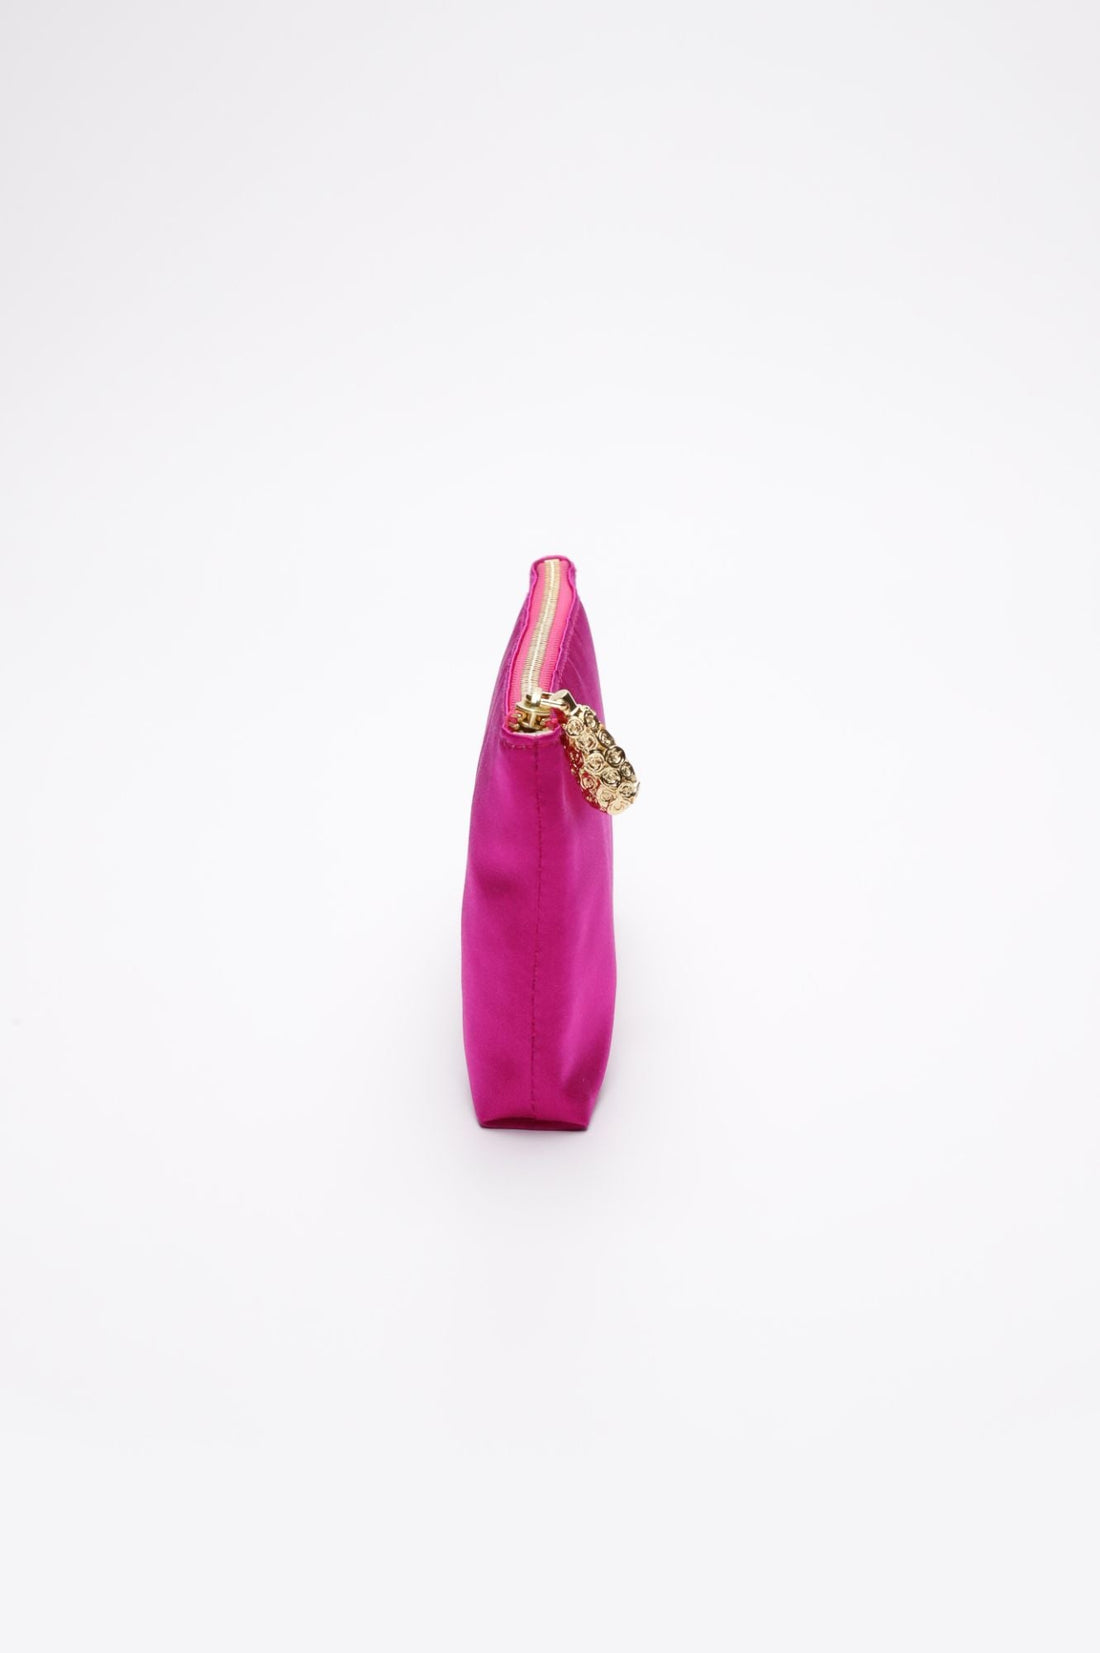 Side view of Hot pink satin pouch.